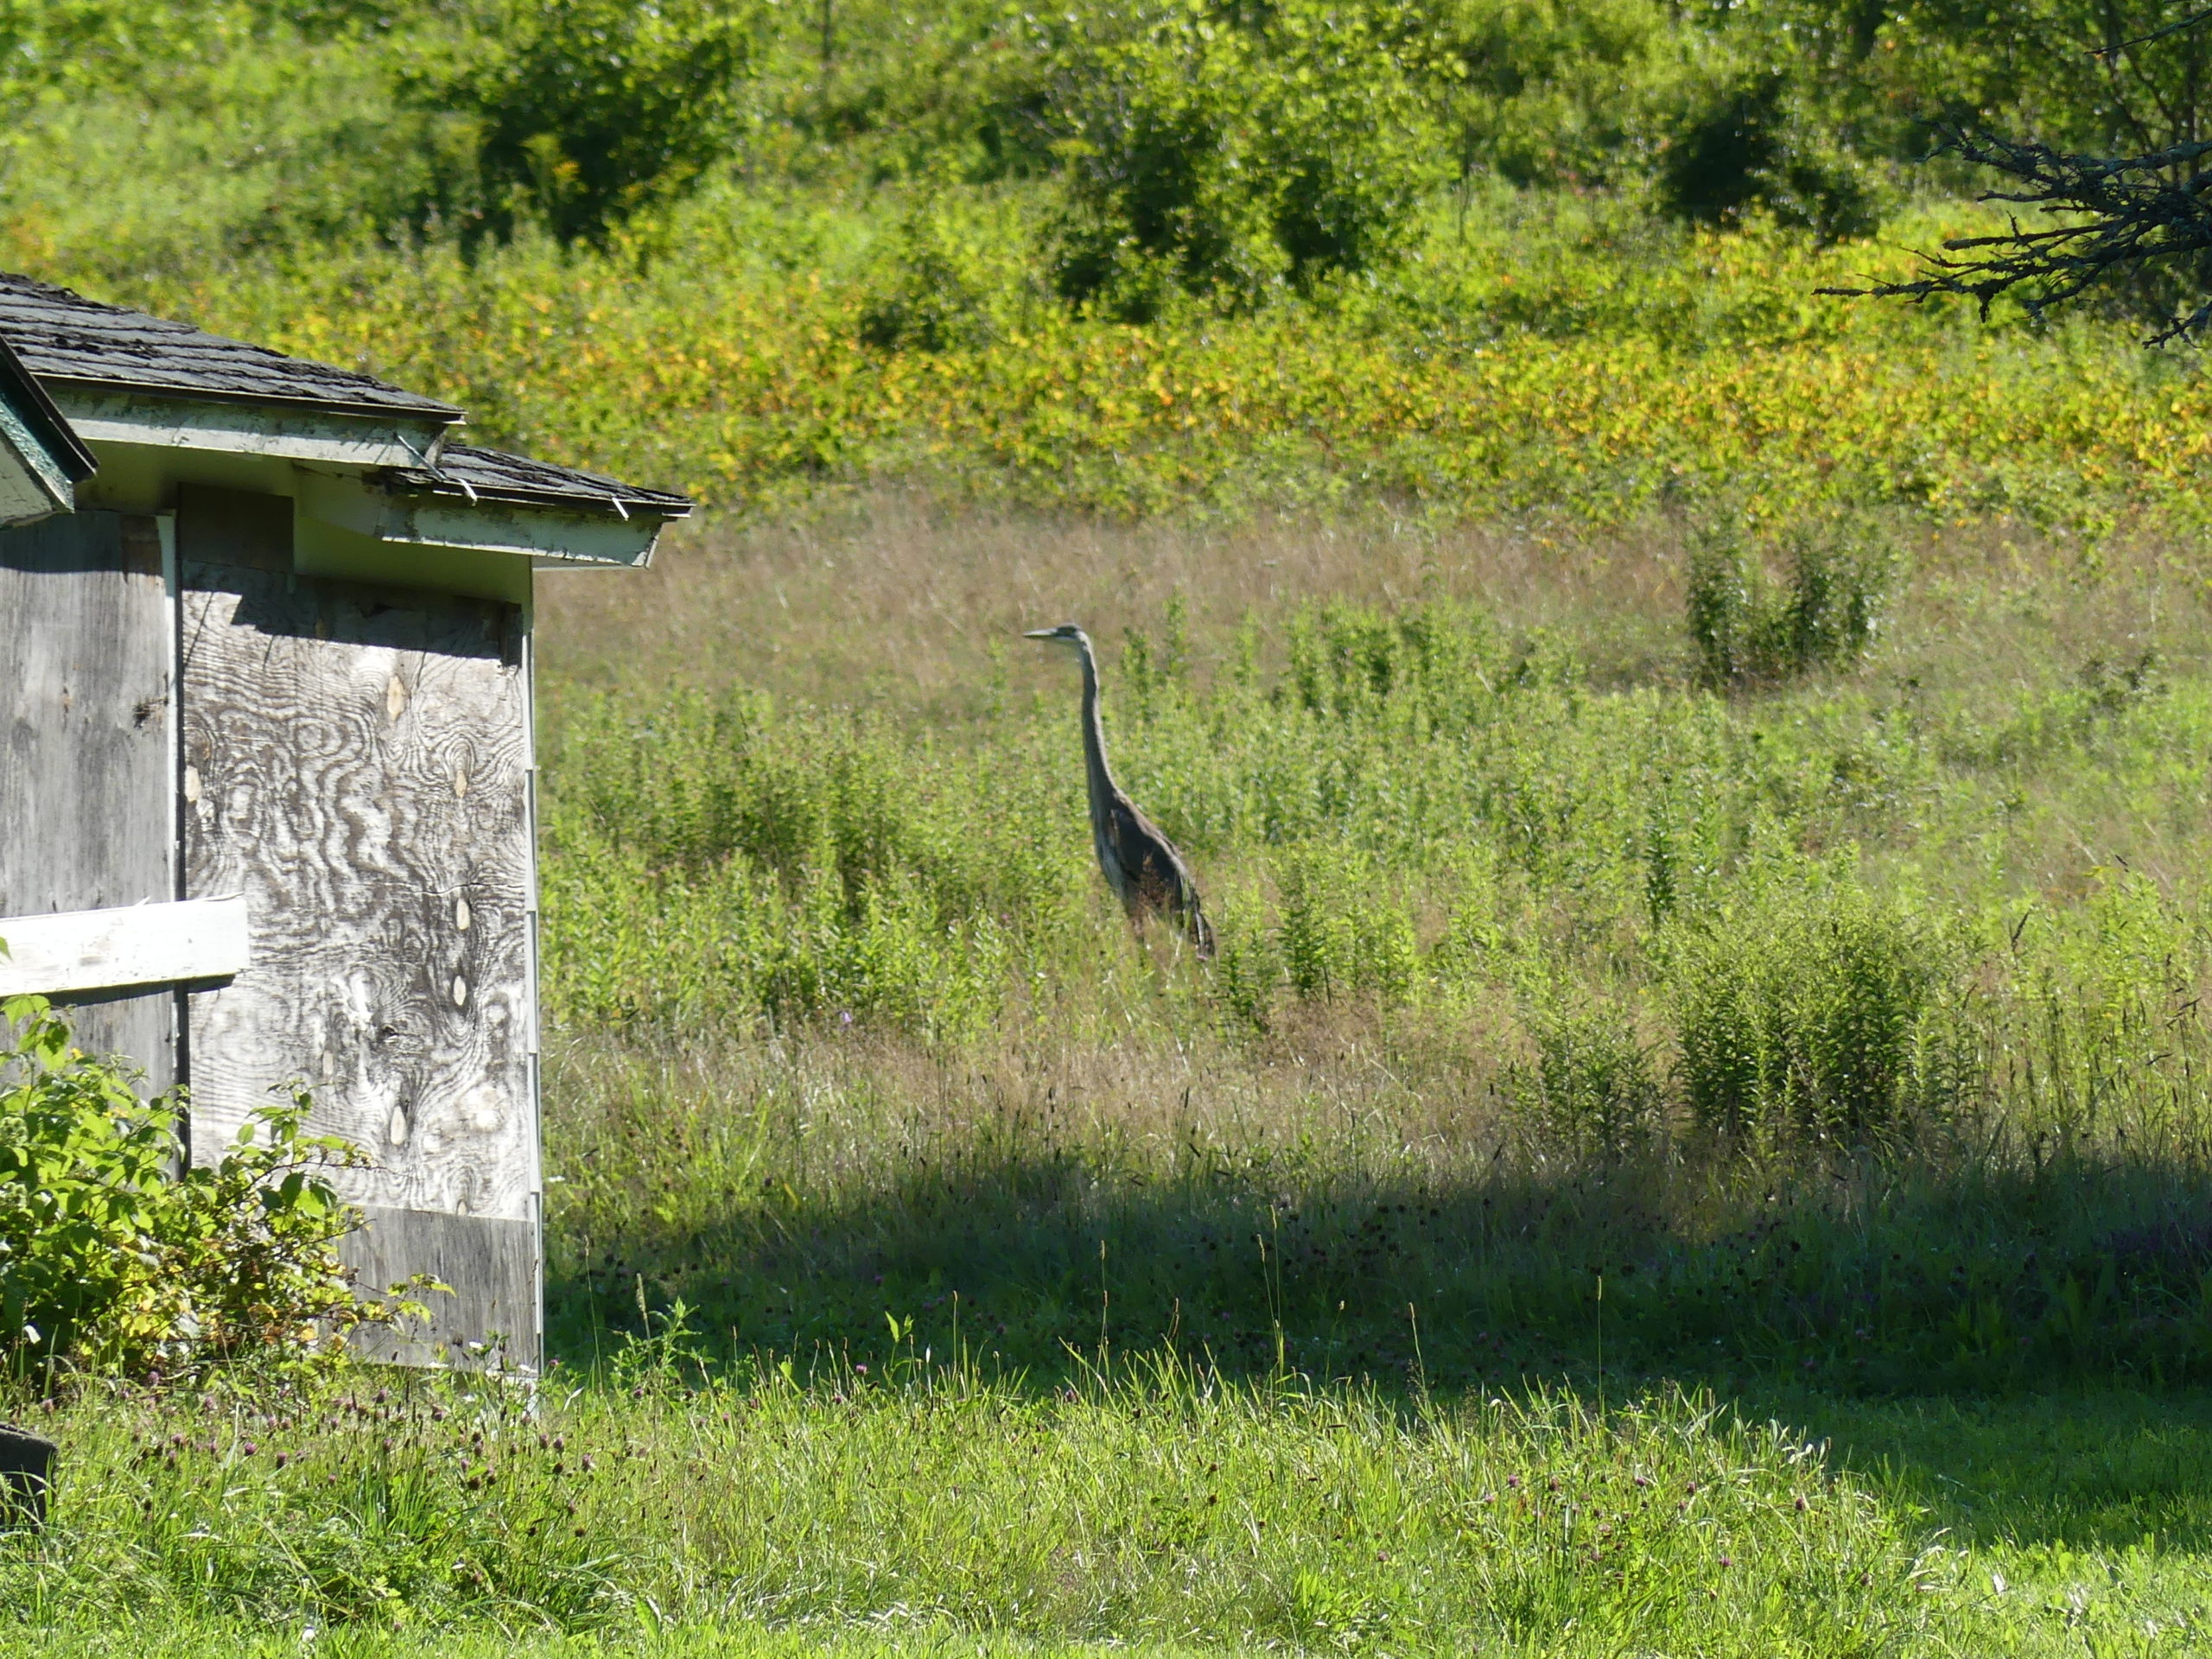 Another great blue heron hunts in a meadow by an abandoned shack looking for toads and voles.